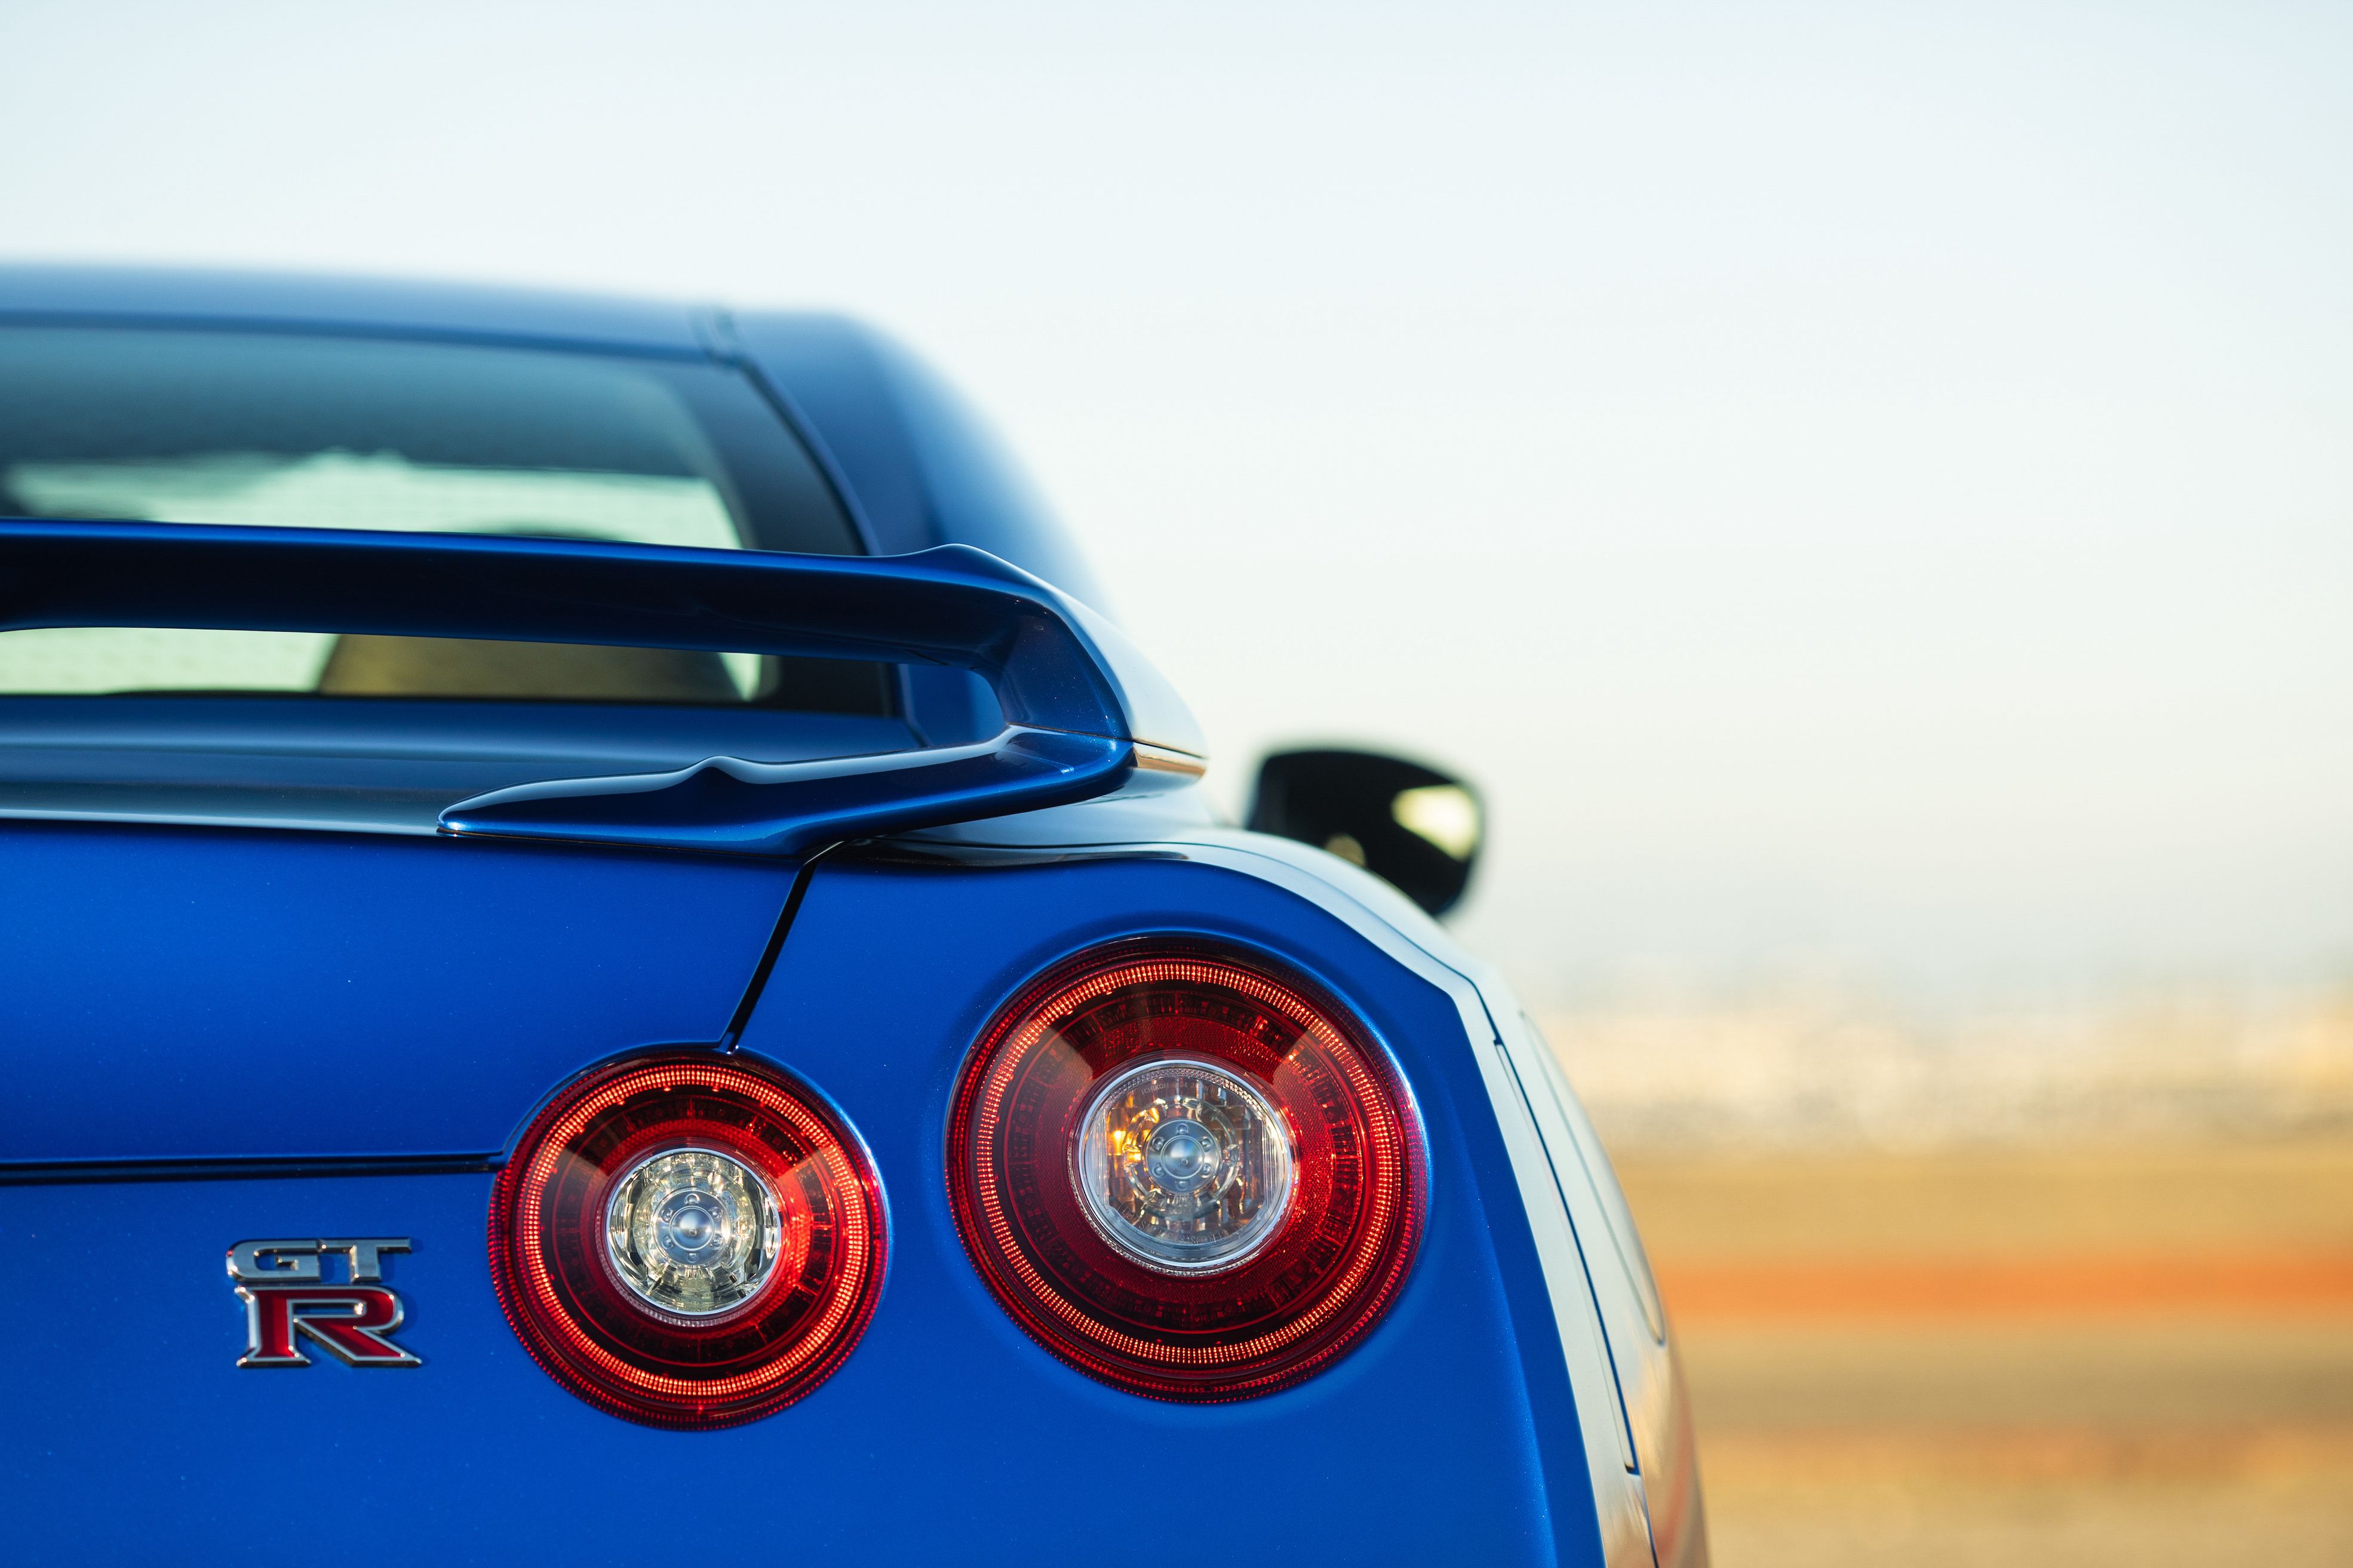 Please Let The R36 Nissan GT-R Look Something Like This